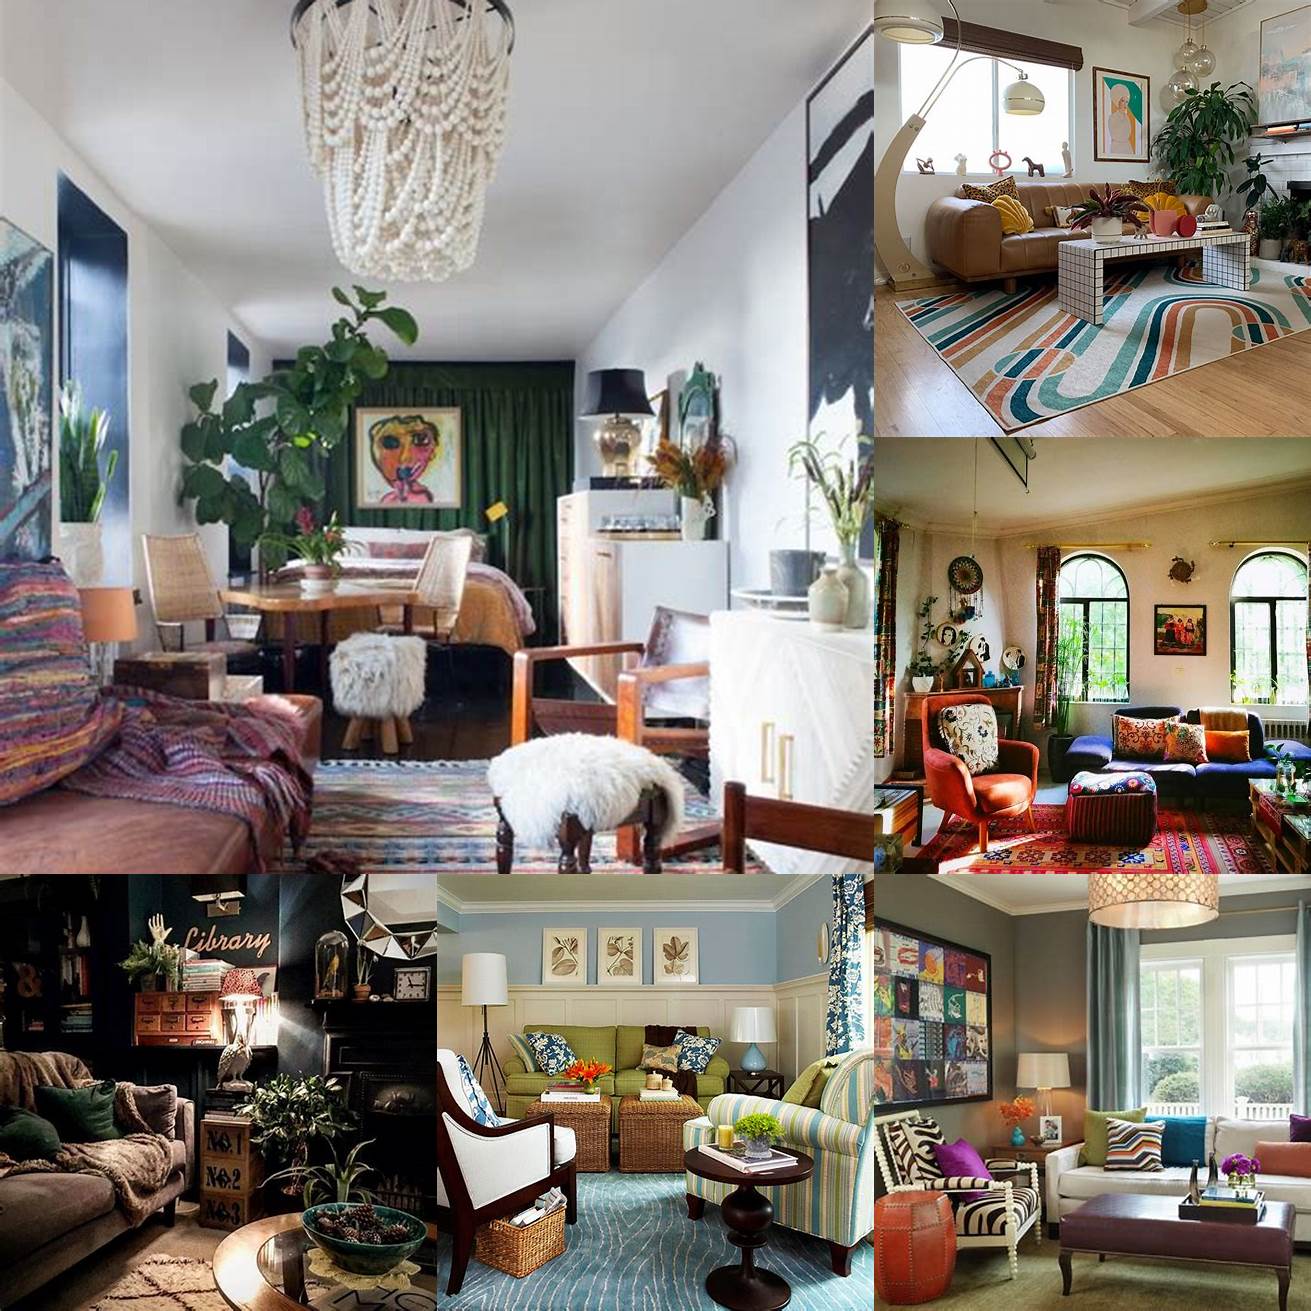 Mix and match different furniture styles to create a unique and eclectic look